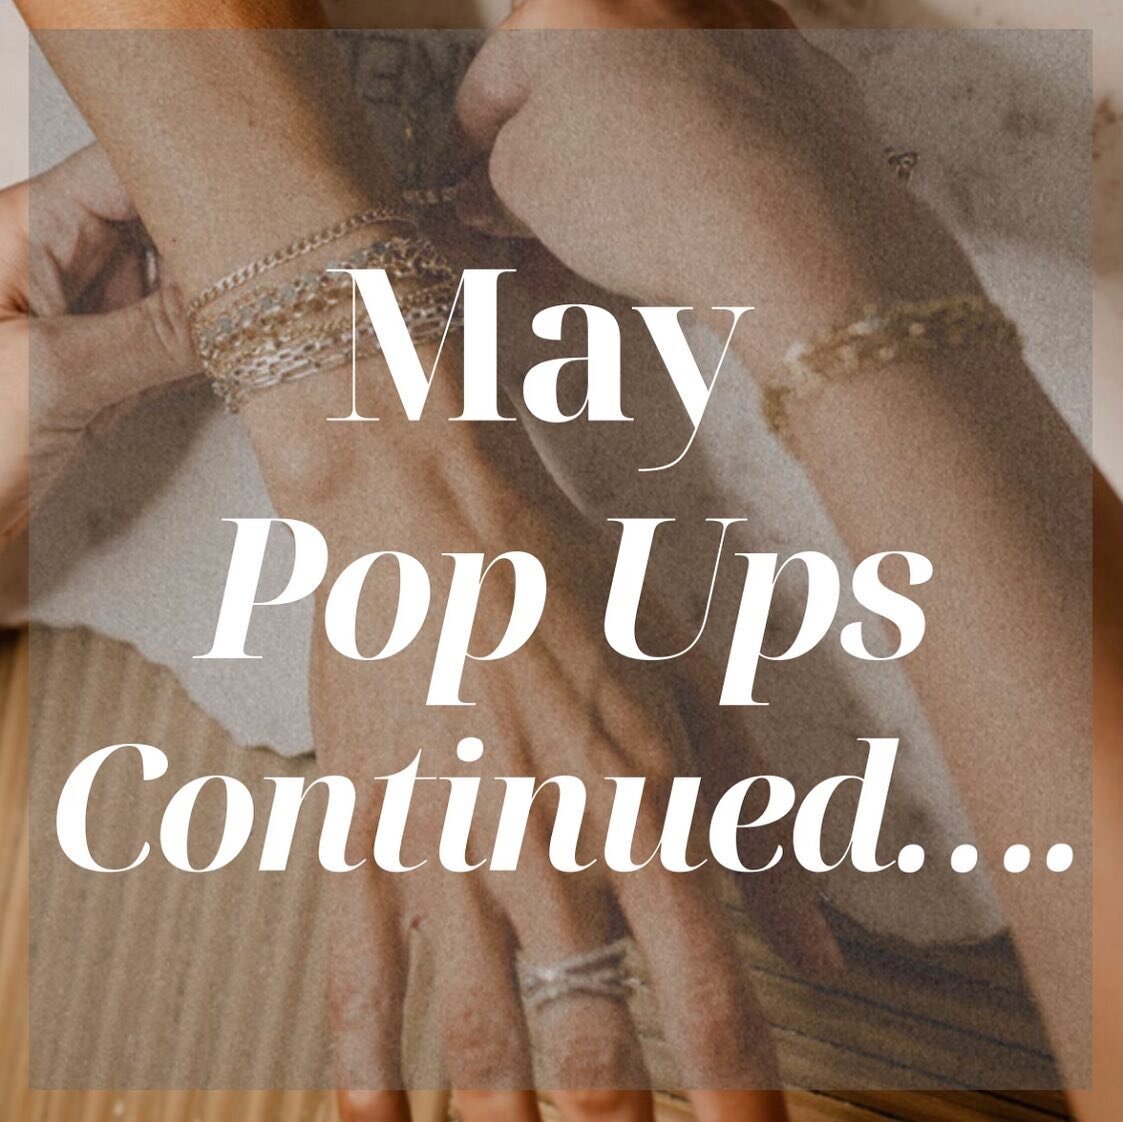 Here&rsquo;s the second half of our pop ups for May. It&rsquo;s going to be a great month, we look forward to seeing!

Just a reminder, appointments aren&rsquo;t needed at our popups, so come have some fun and get linked up. 💕⚡️⛓️
.
.
.
.
.
.
.
.

.